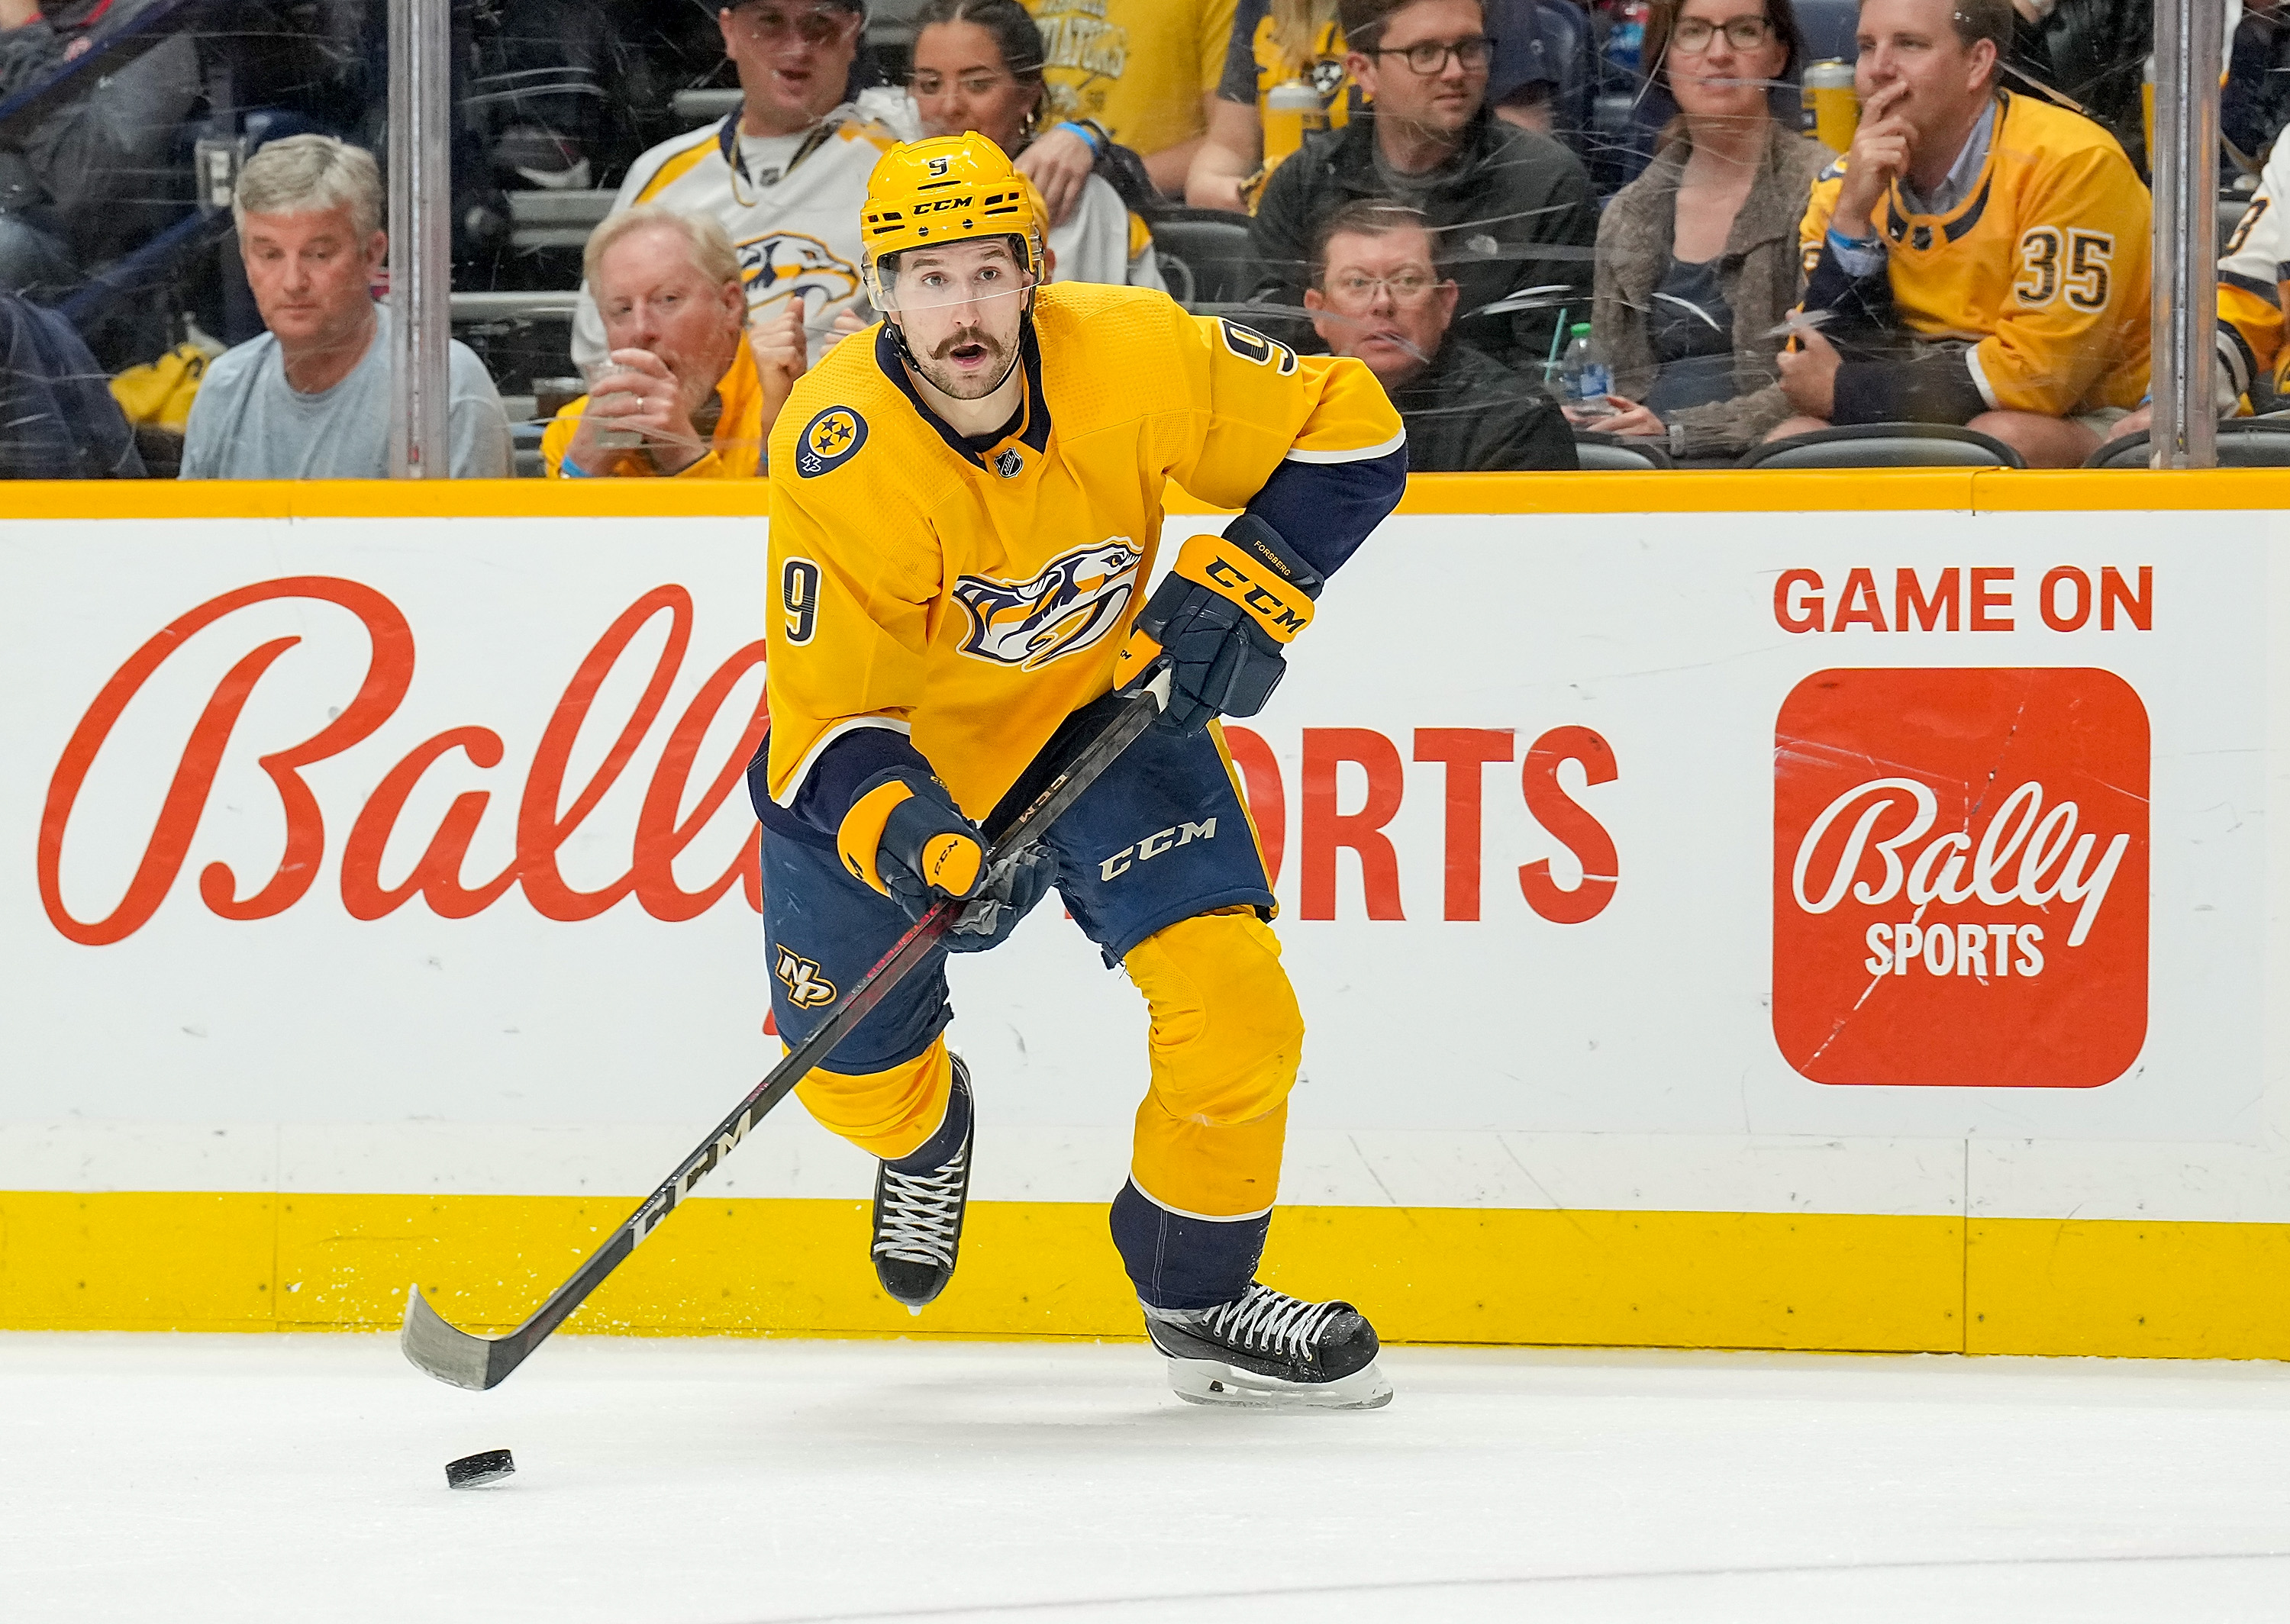 Filip Forsberg #9 of the Nashville Predators skates against the Colorado Avalanche in Game Four of the First Round of the 2022 Stanley Cup Playoffs at Bridgestone Arena on May 9, 2022 in Nashville, Tennessee.